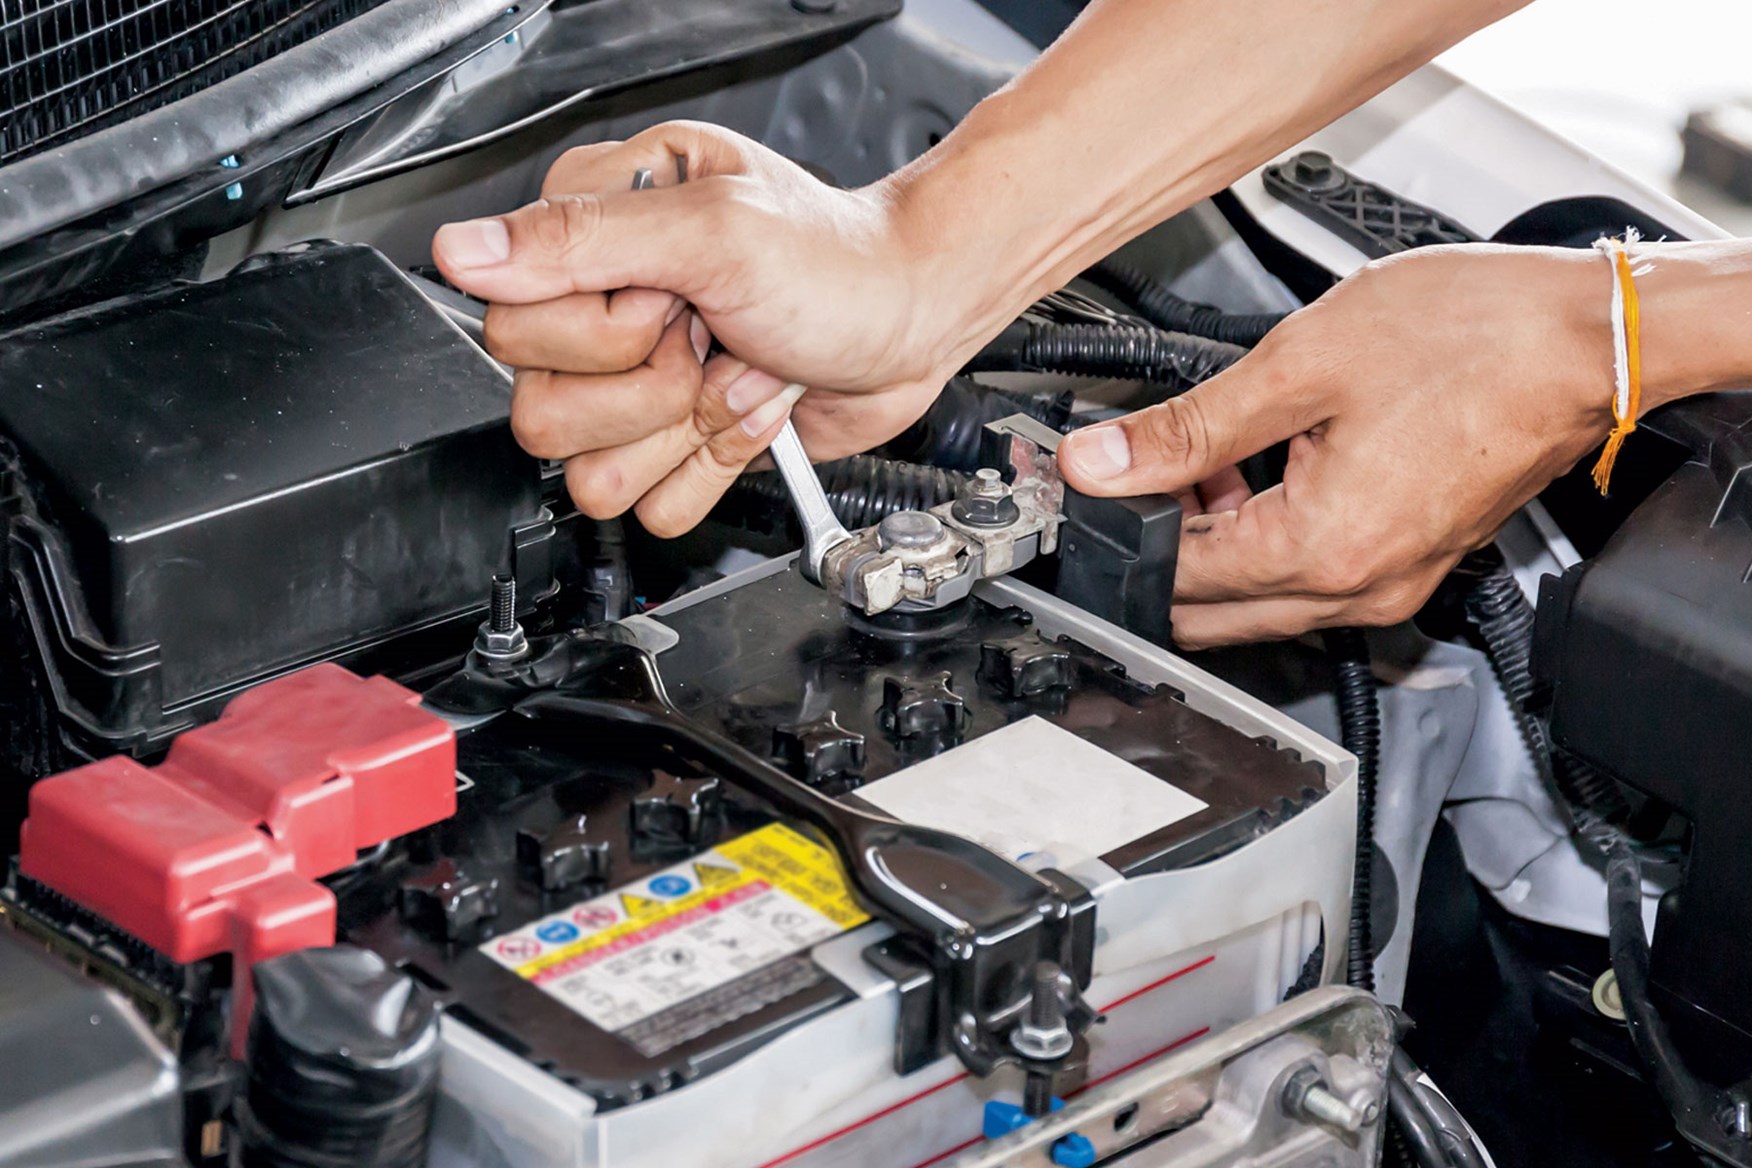 How to disconnect your car battery